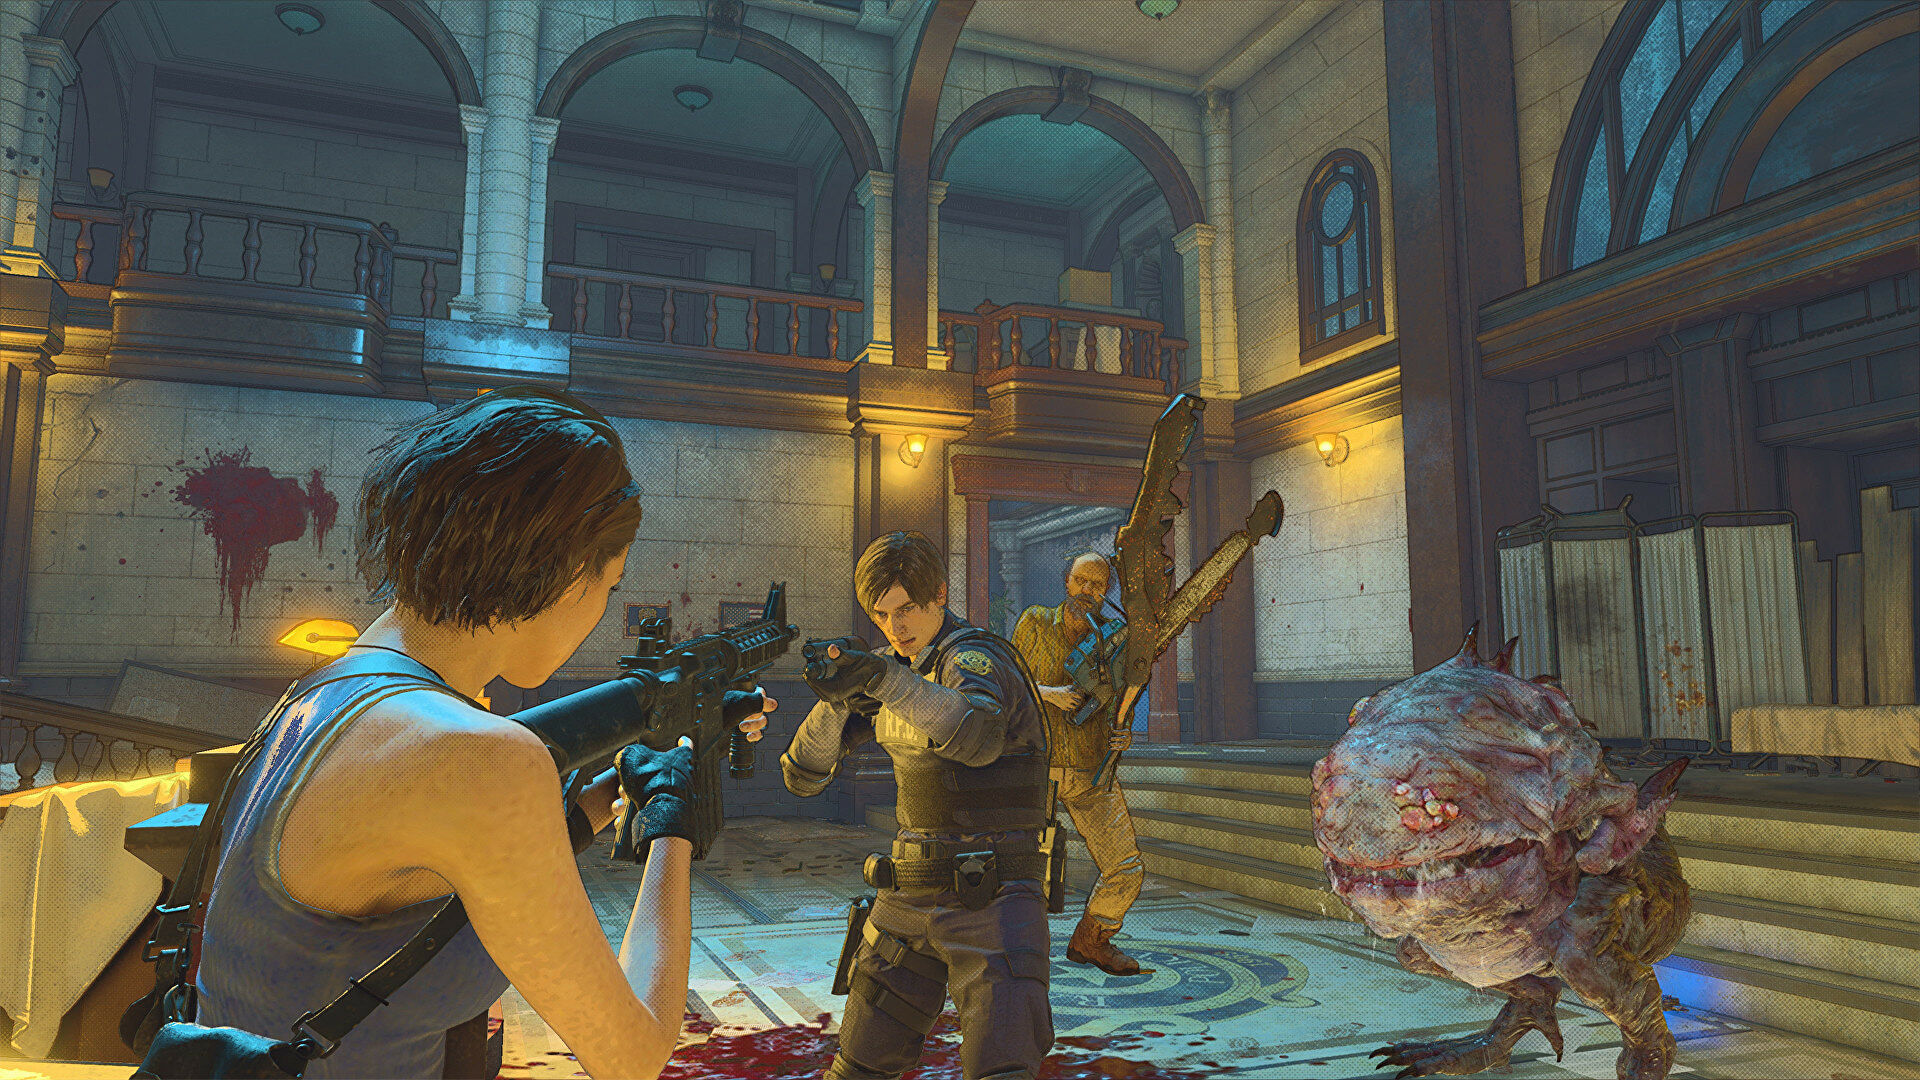 Resident Evil Re:Verse’s early access period starts October 24th